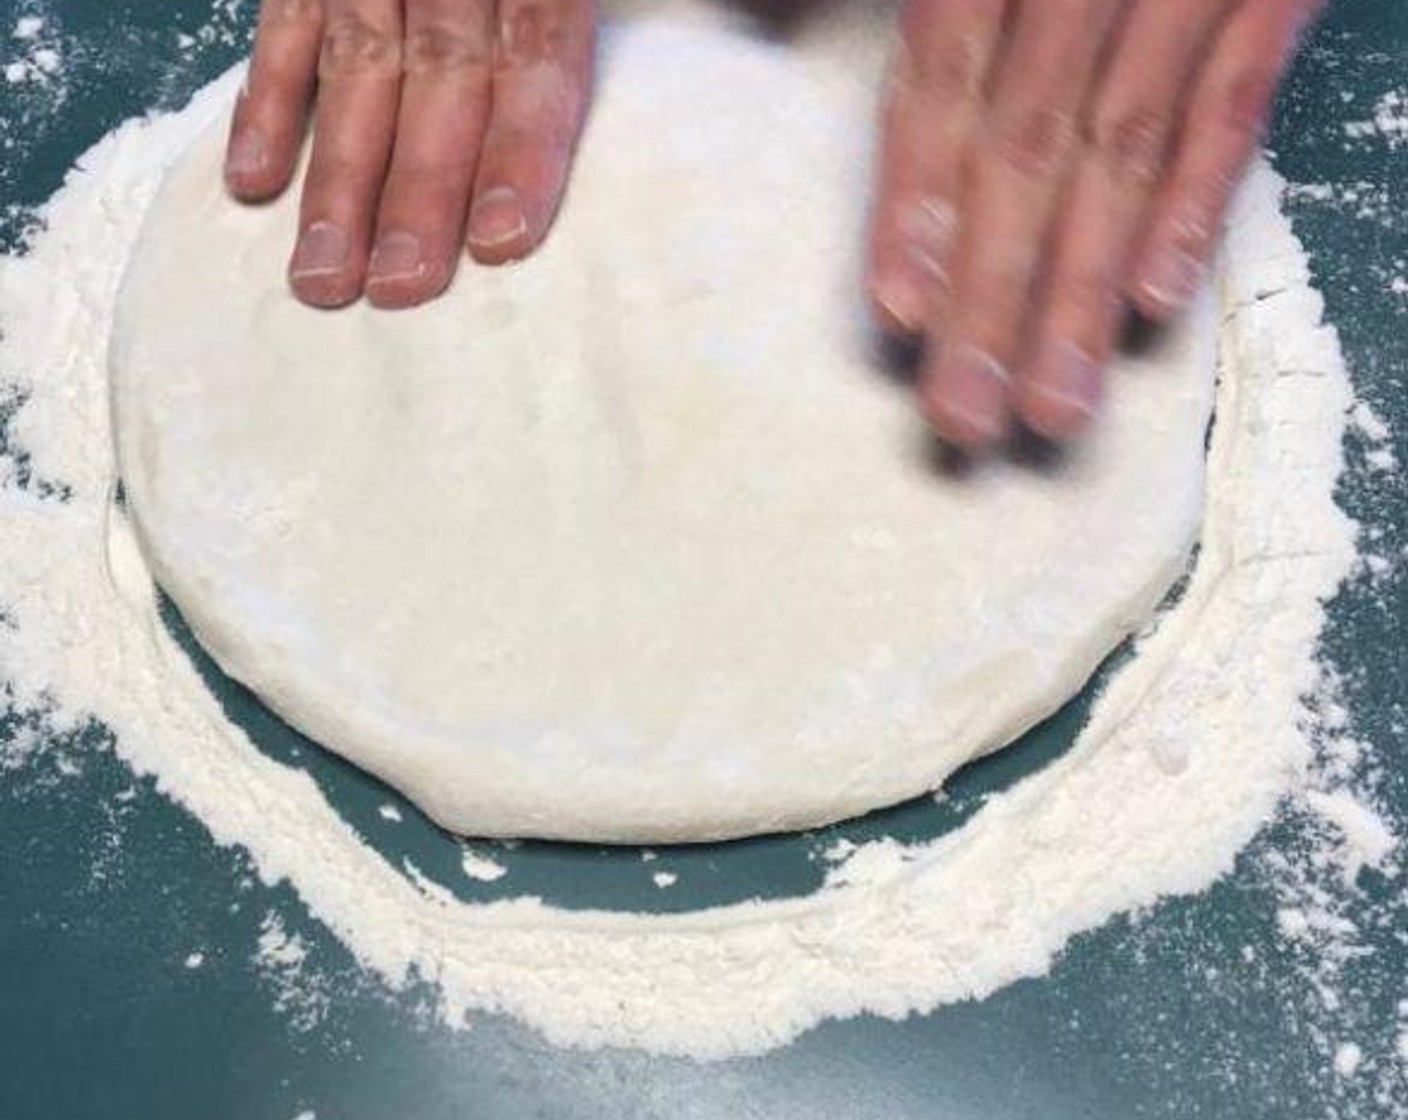 step 4 Once Pizza Dough (1) is raised, shape into roughly a 10" pie. Use generous amounts of flour so the dough doesn't stick to the working surface.